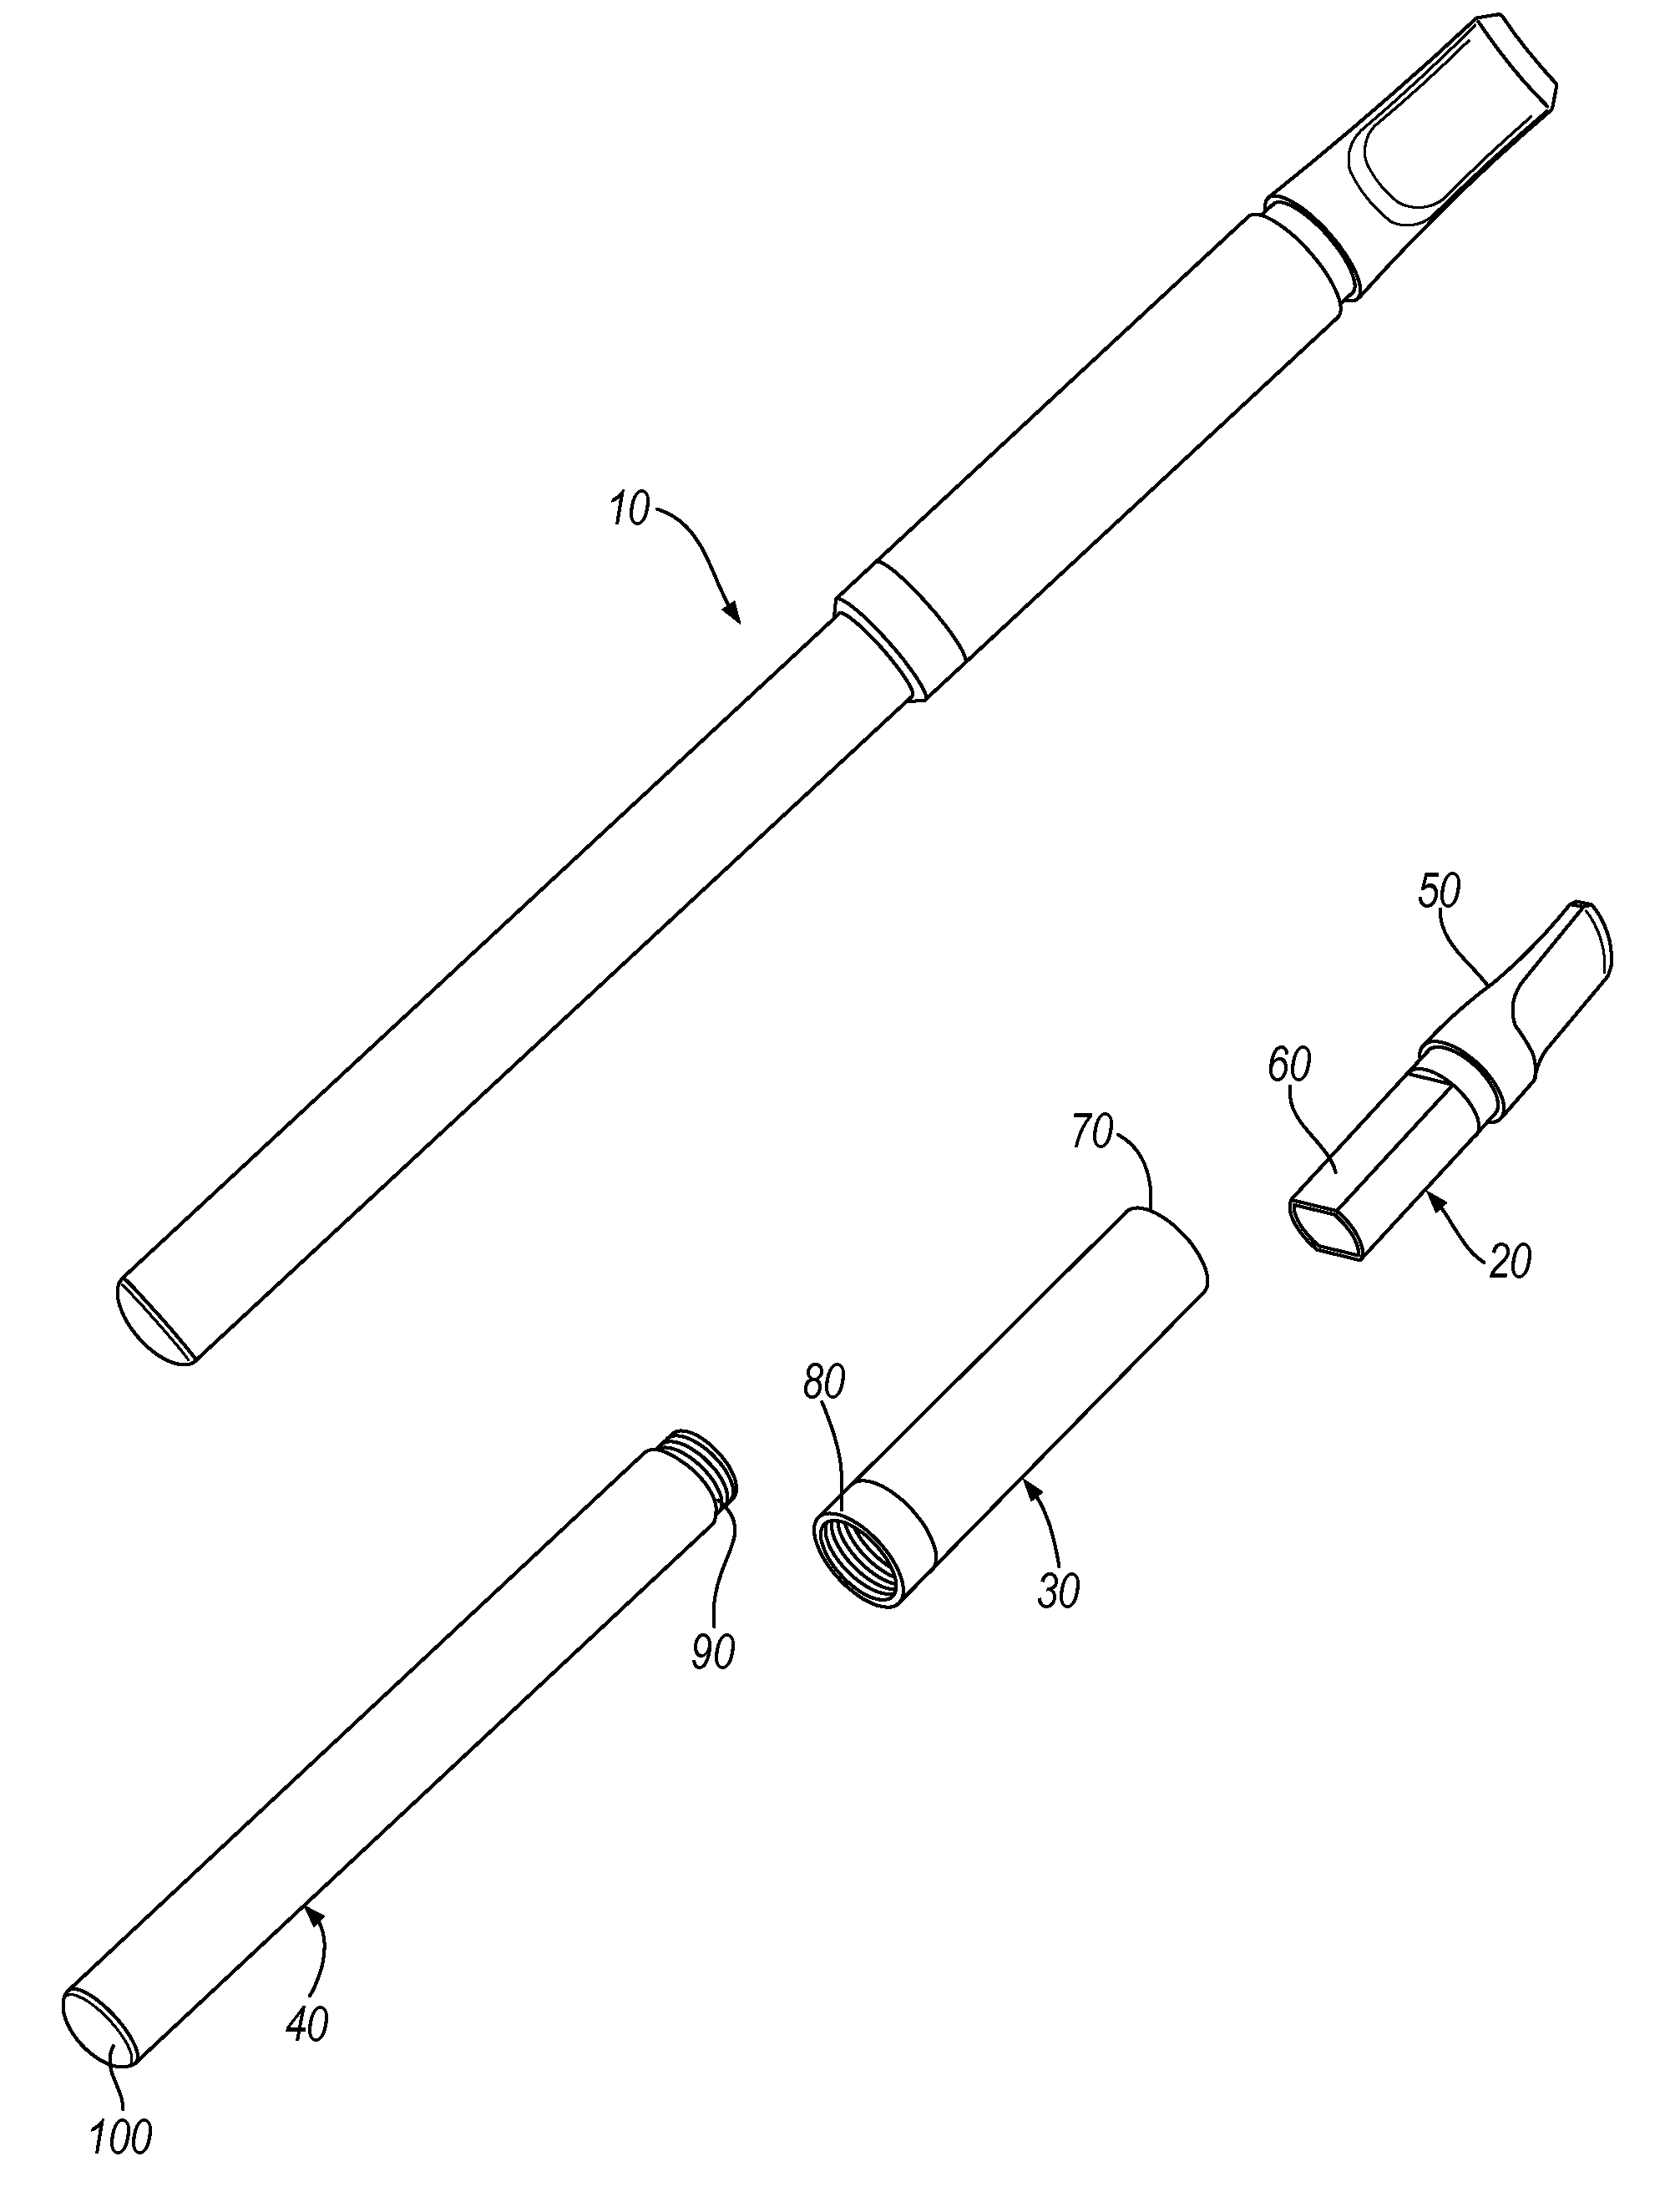 Method and apparatus relating to electronic smoking-substitute devices